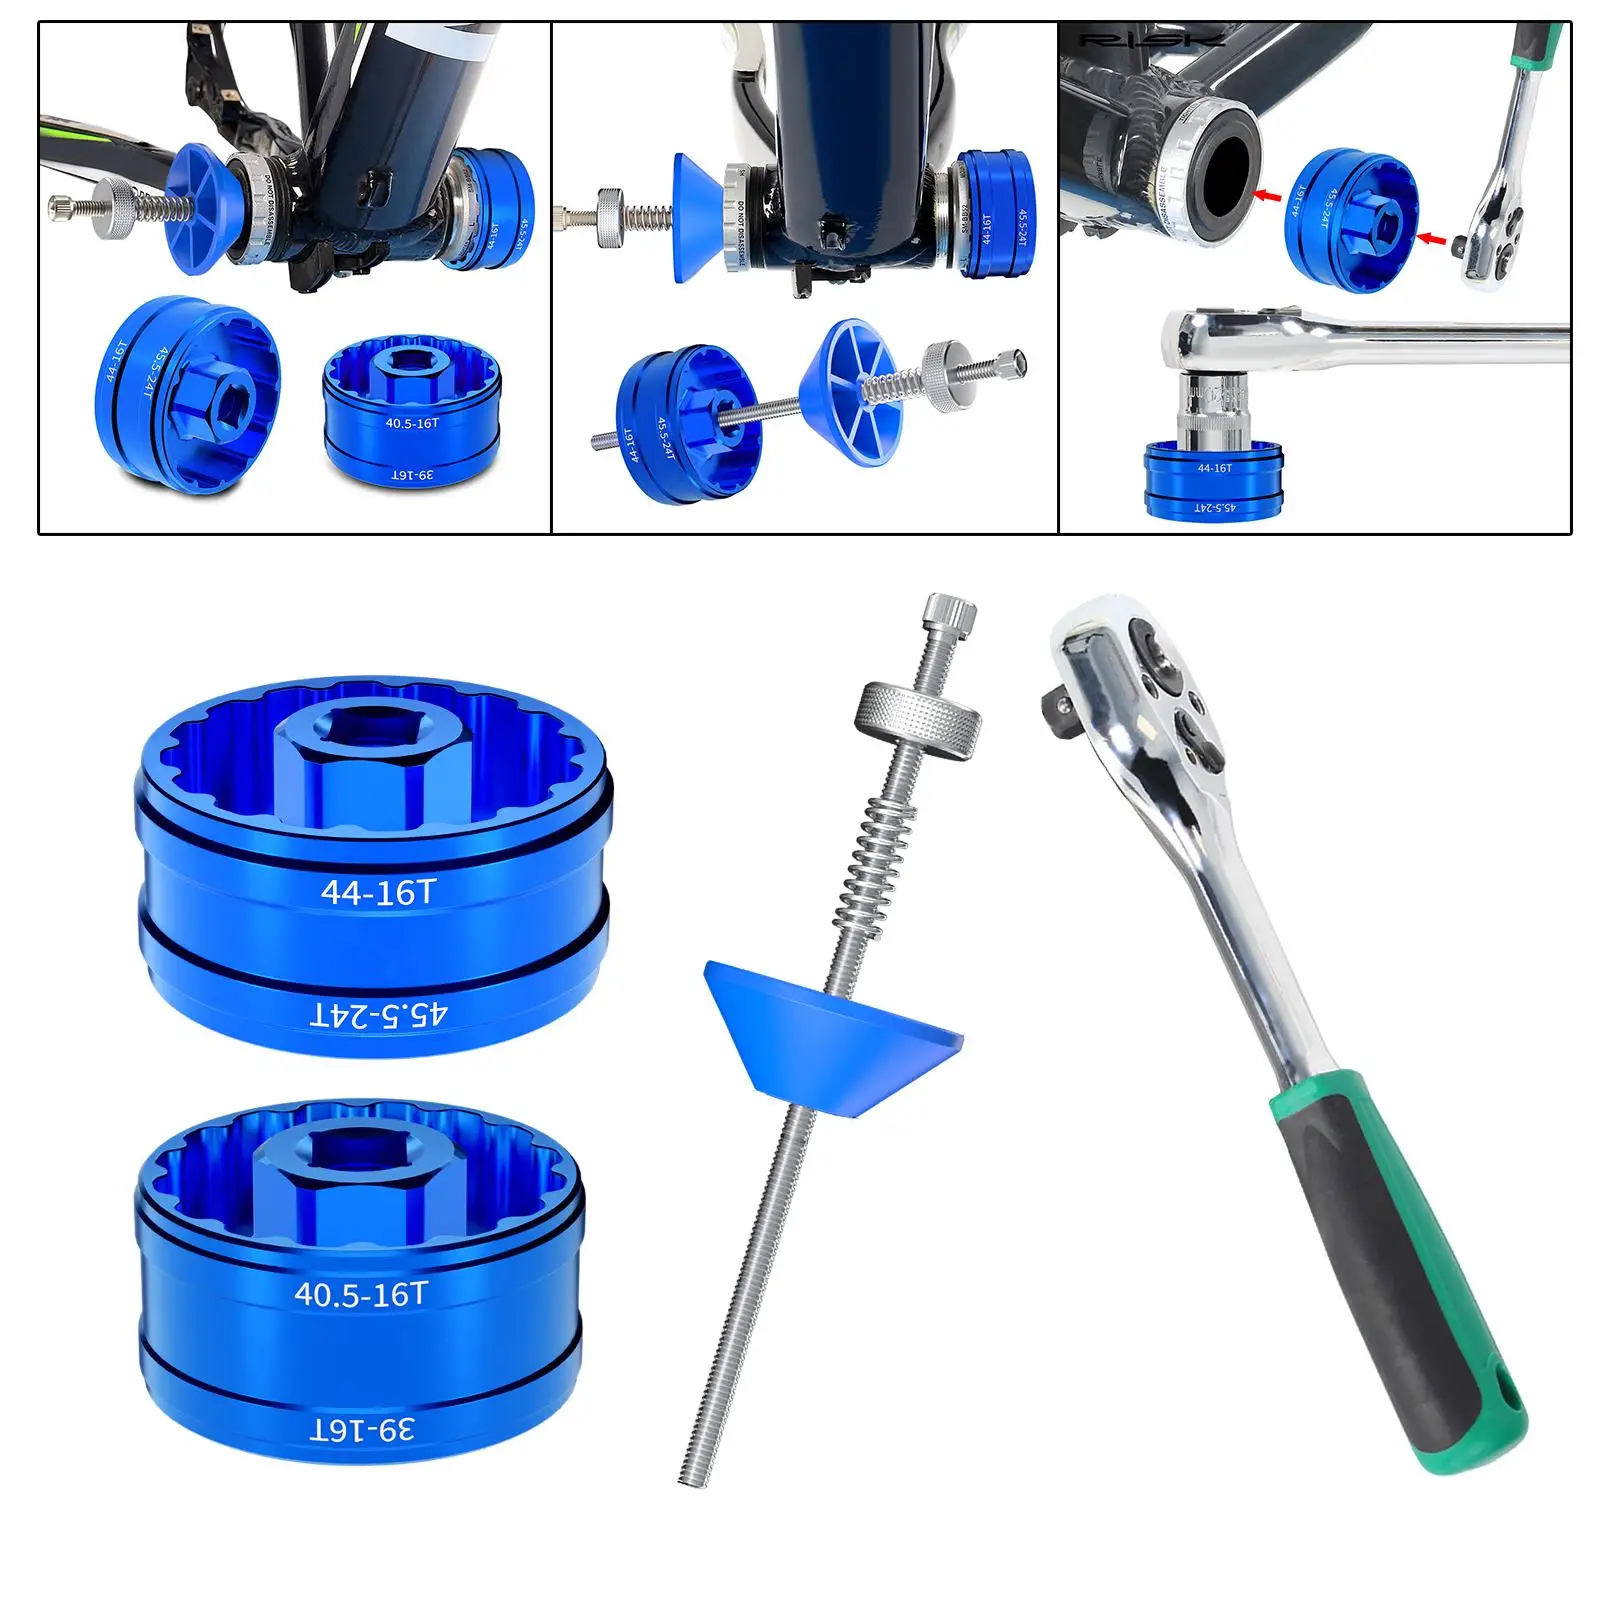 BB Removal Tool Bike Professional Durable Portable Maintenance Tool Accs Outdoor Disassembly Bottom Bracket Bearing Repair Tool